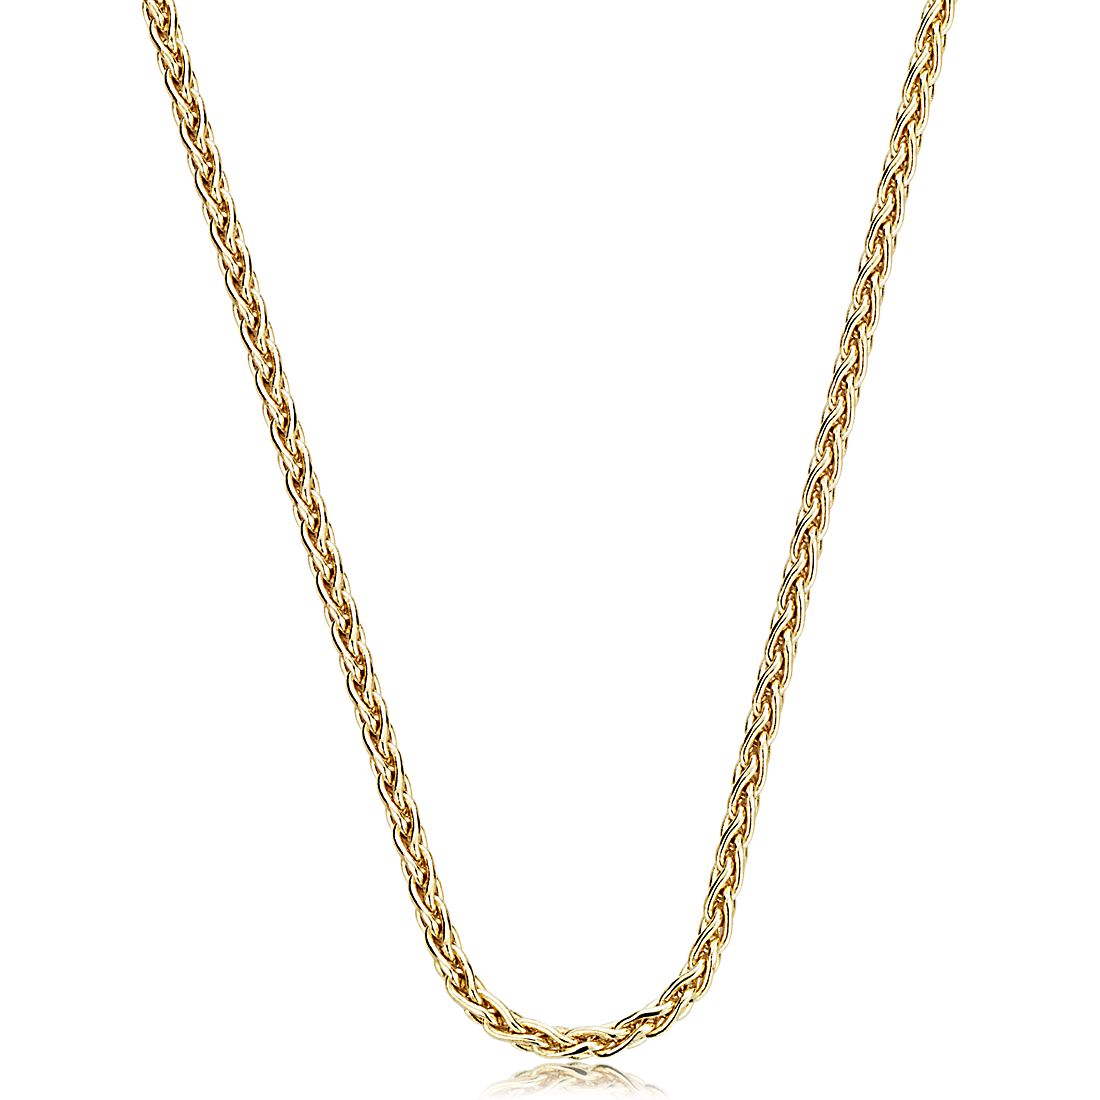 Wheat Chain in 14k Yellow Gold (1.2 mm)